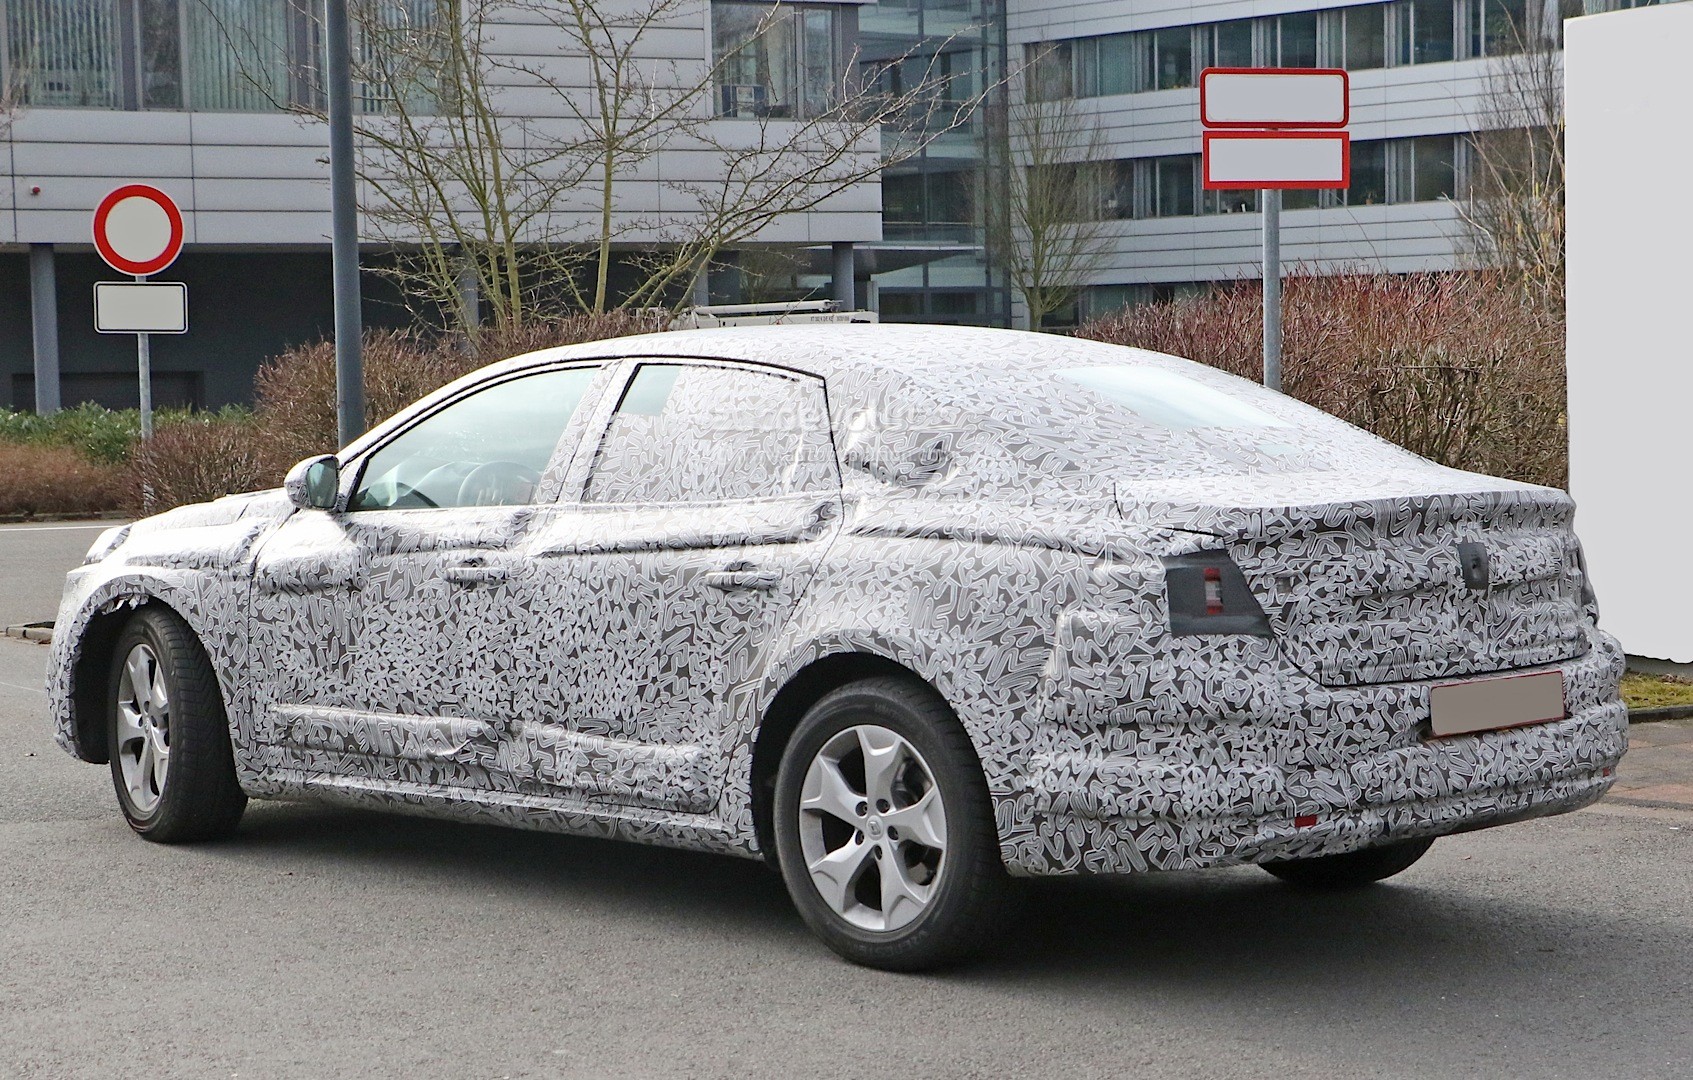 all-new-2016-renault-laguna-flagship-sedan-spied-for-the-first-time-photo-gallery_7.jpg